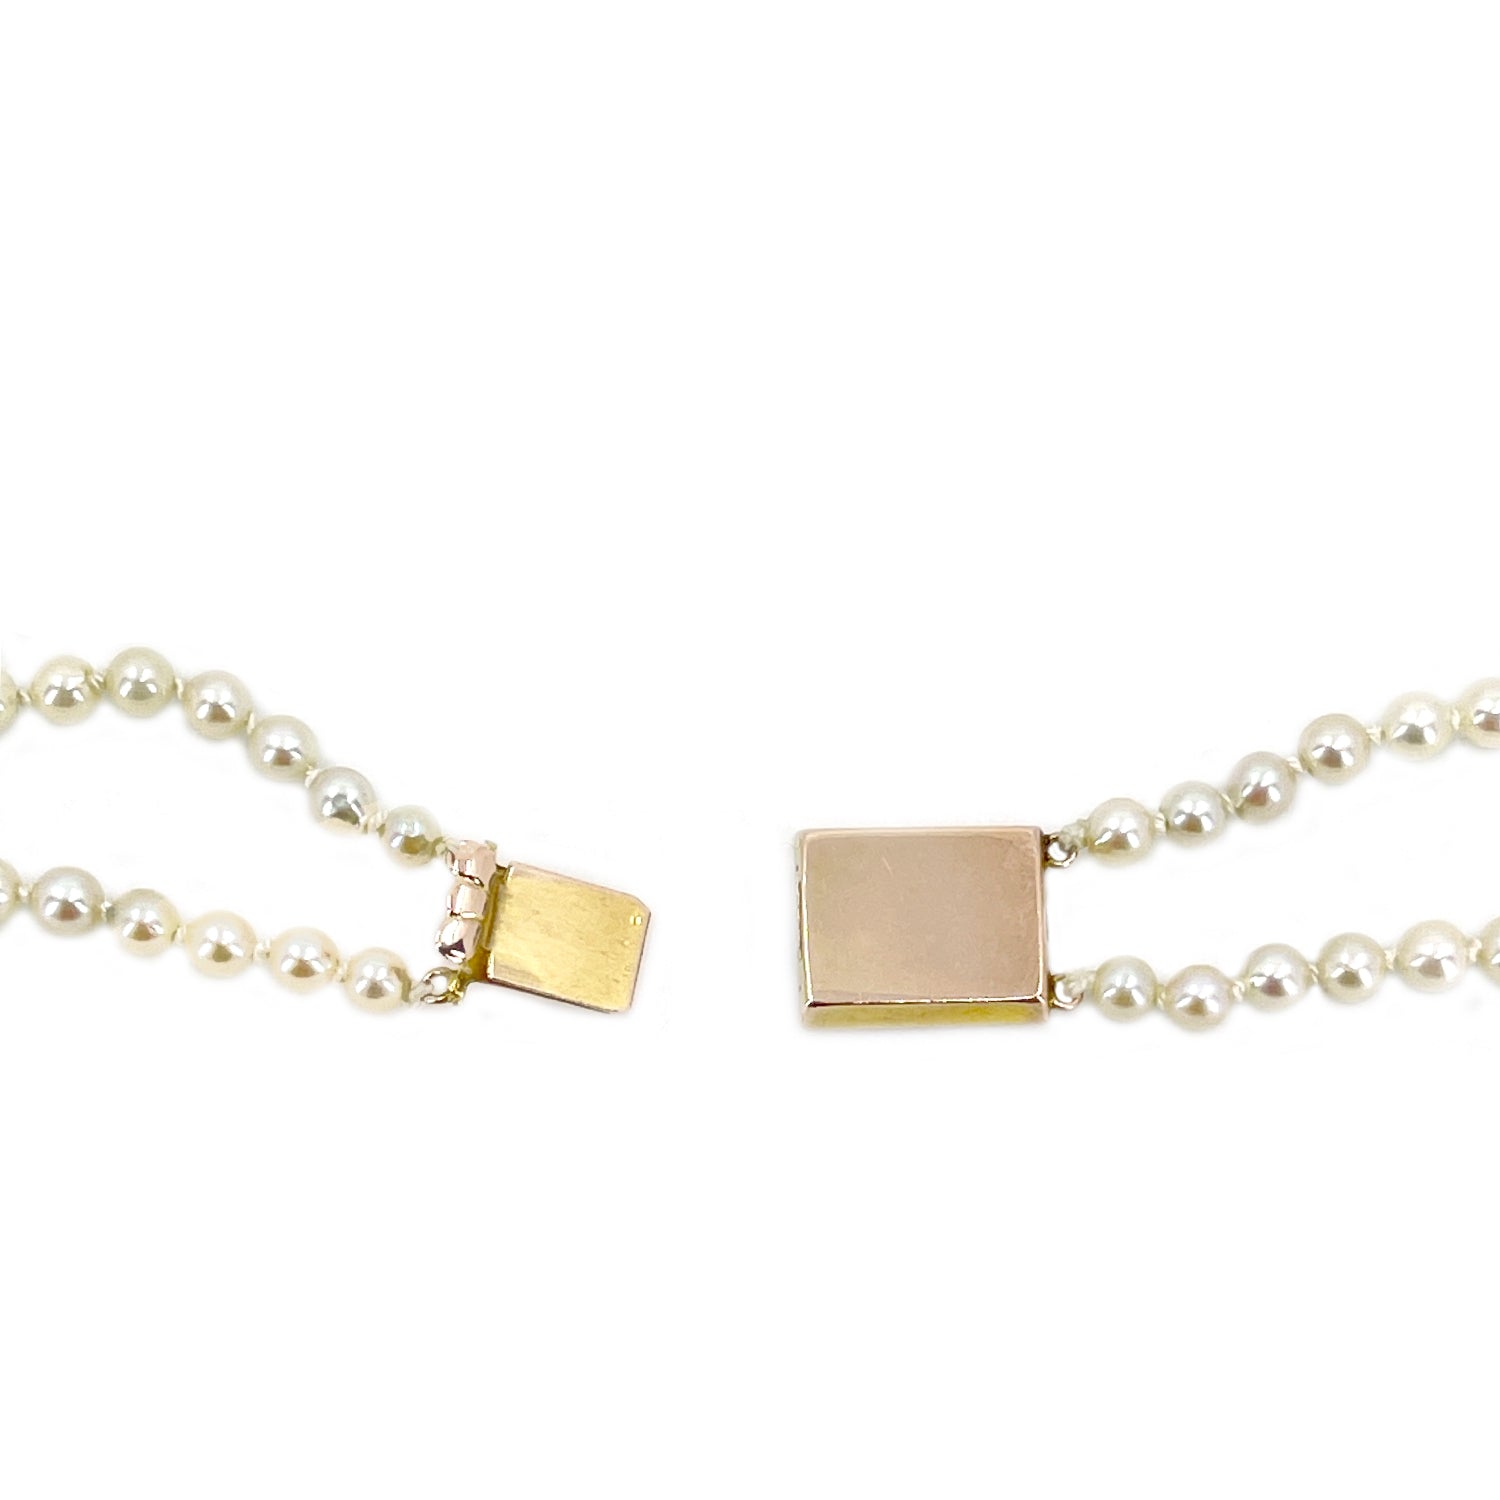 Ciro Vintage Double Strand Graduated Japanese Saltwater Cultured Akoya Pearl Necklace - 9K Rose Gold 19.50 & 20.25 Inch